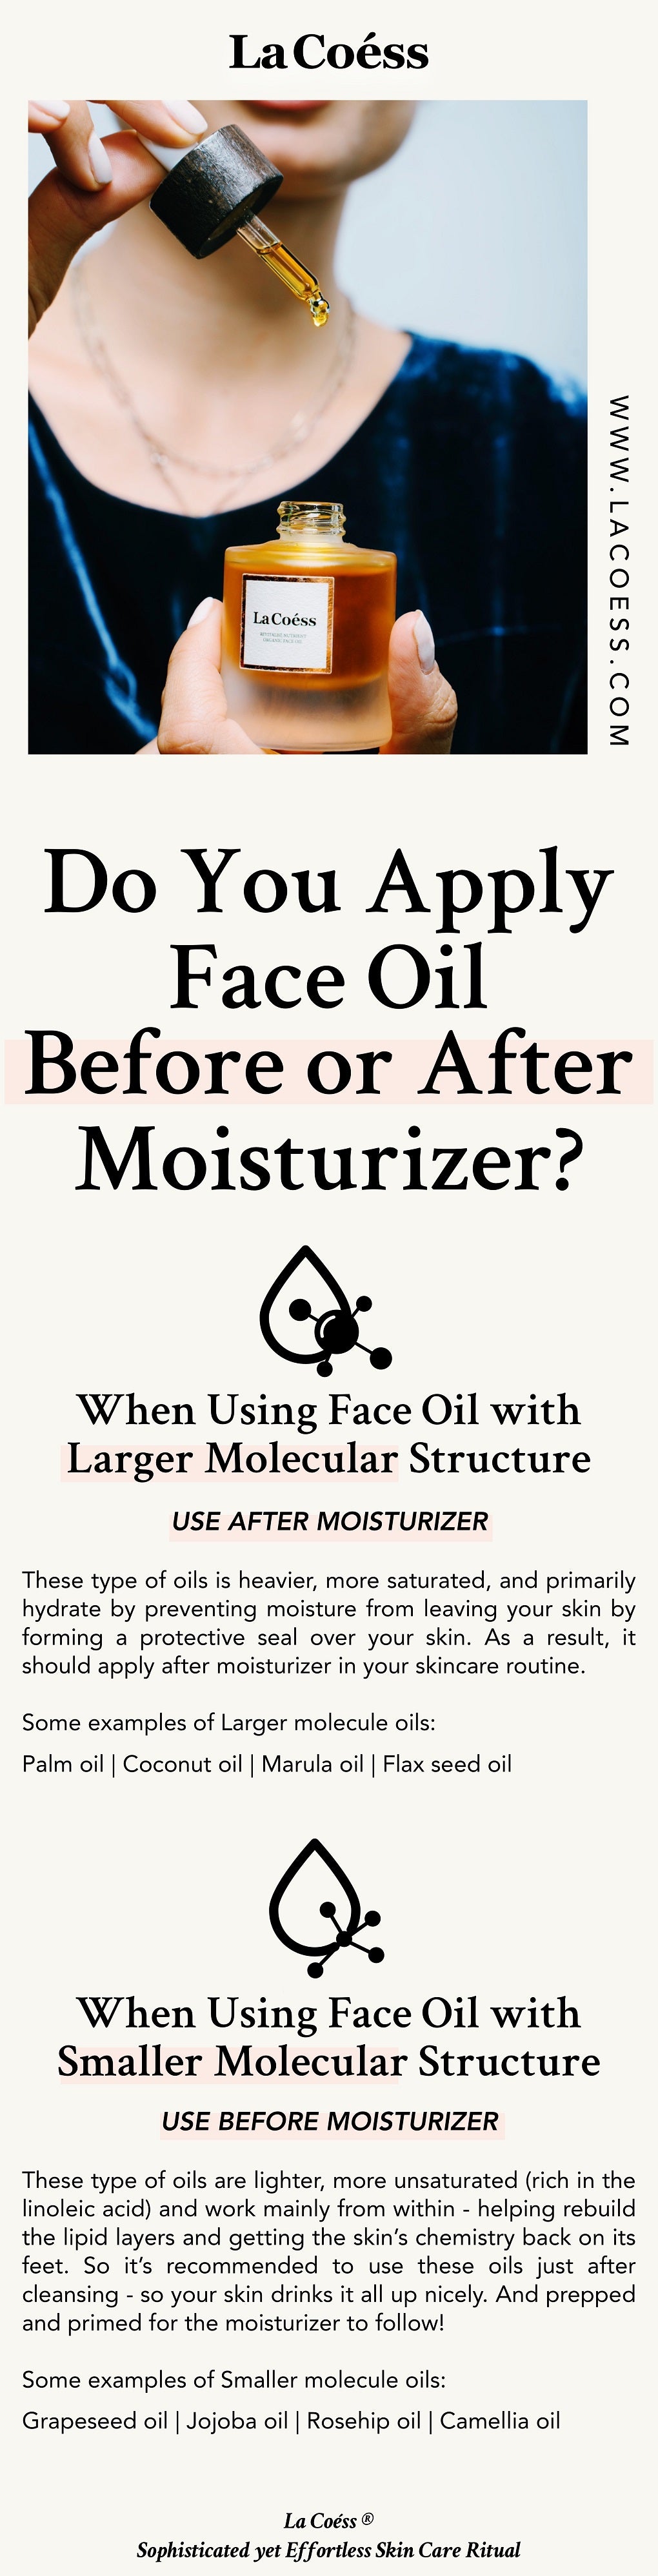 Do You Apply Face Oil Before or After Moisturizer?